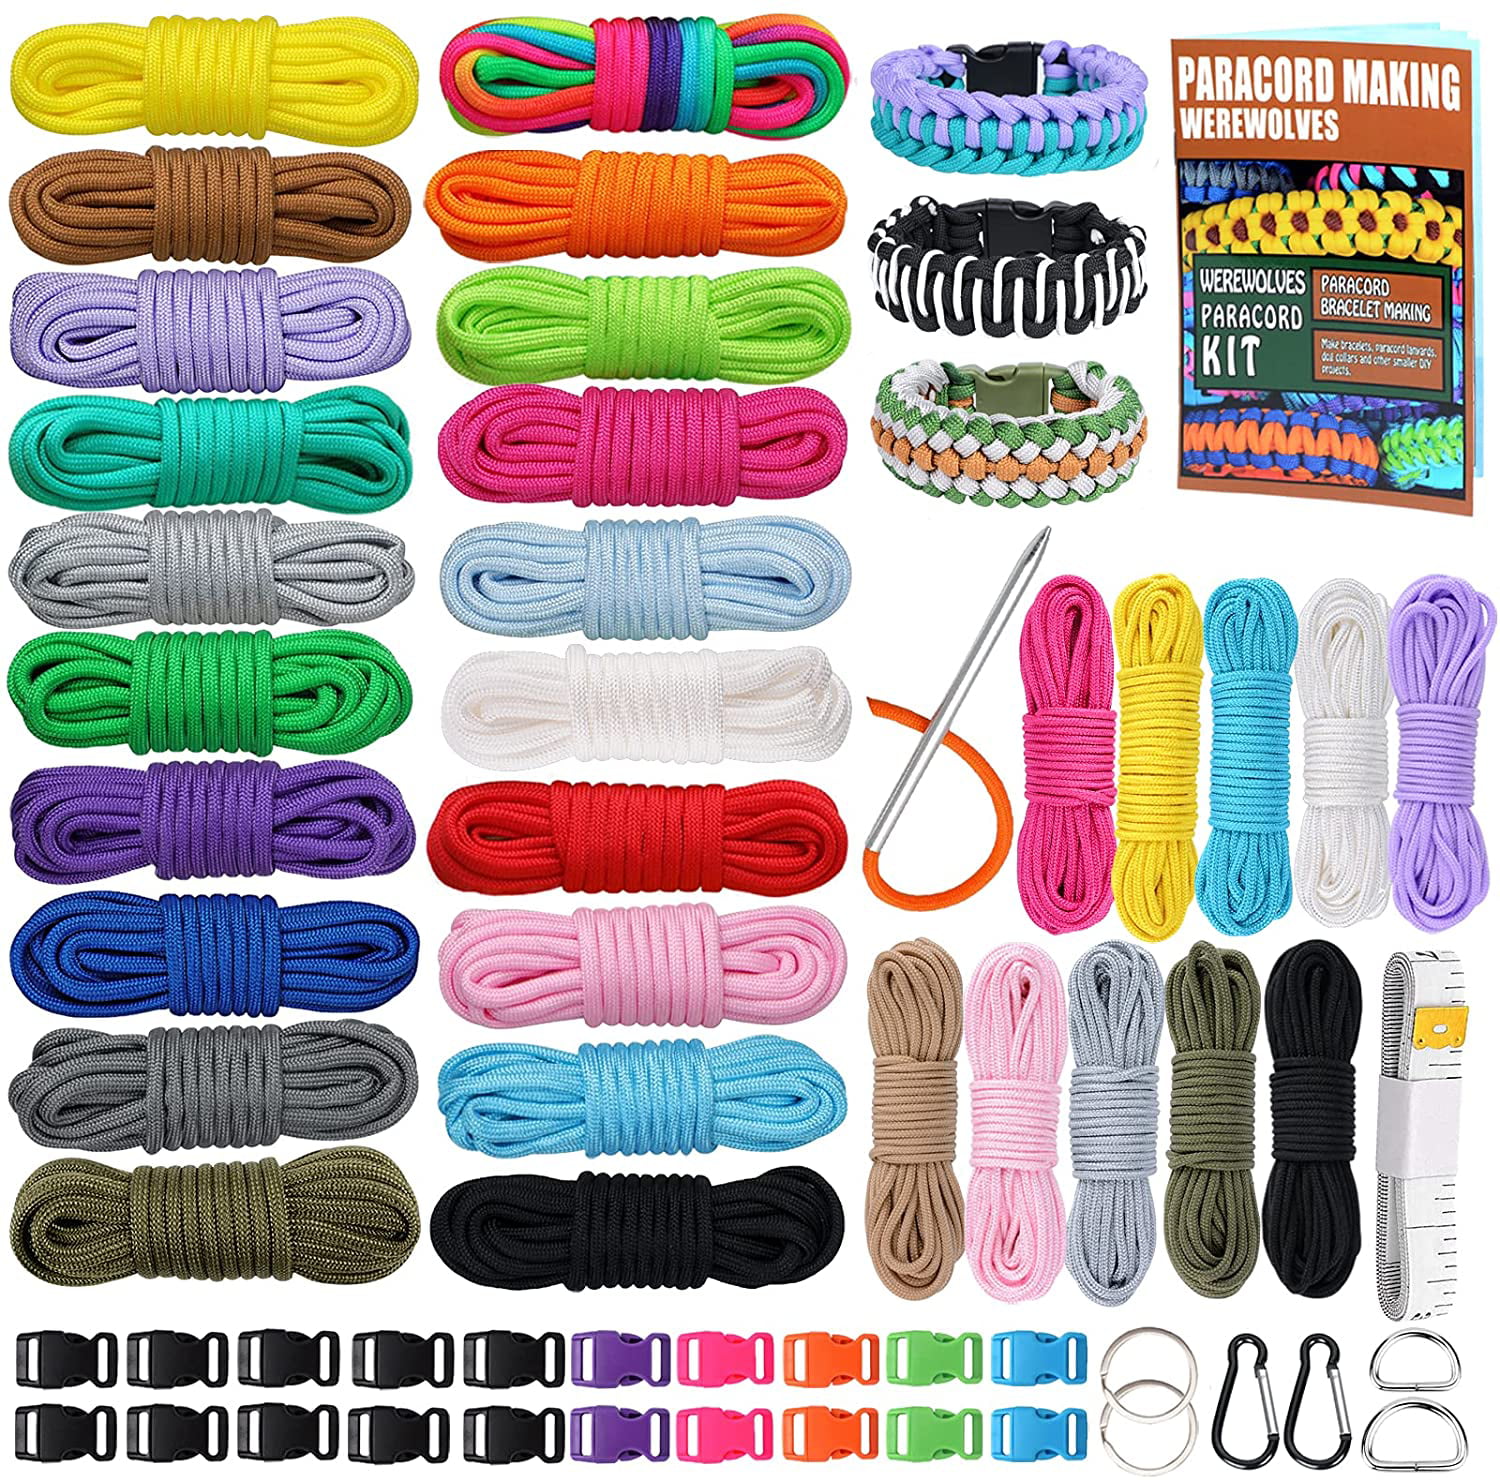 Keychain Dog Collar Lanyard Tent Rope Paracord Combo Crafting Kit with Buckles and Paracord Stitching Needles for Making Bracelet 24 Colors 10 Feet Paracord Cord 550 Multifunction Paracord Ropes